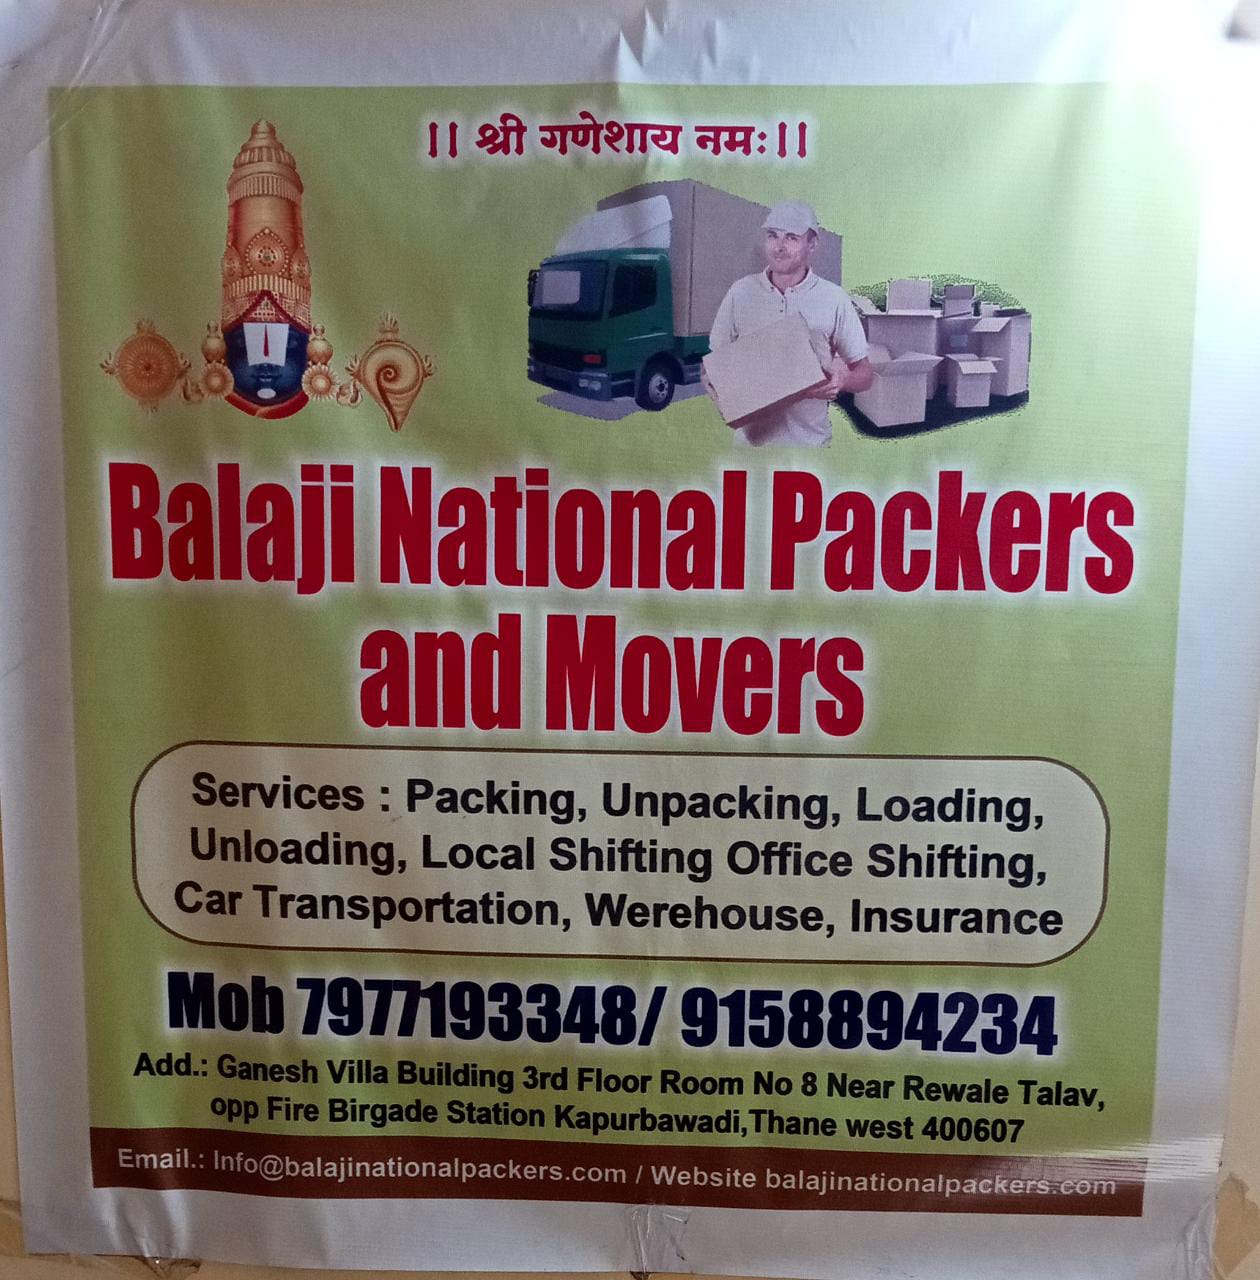 Balaji National Packers and Movers To Add New Locations